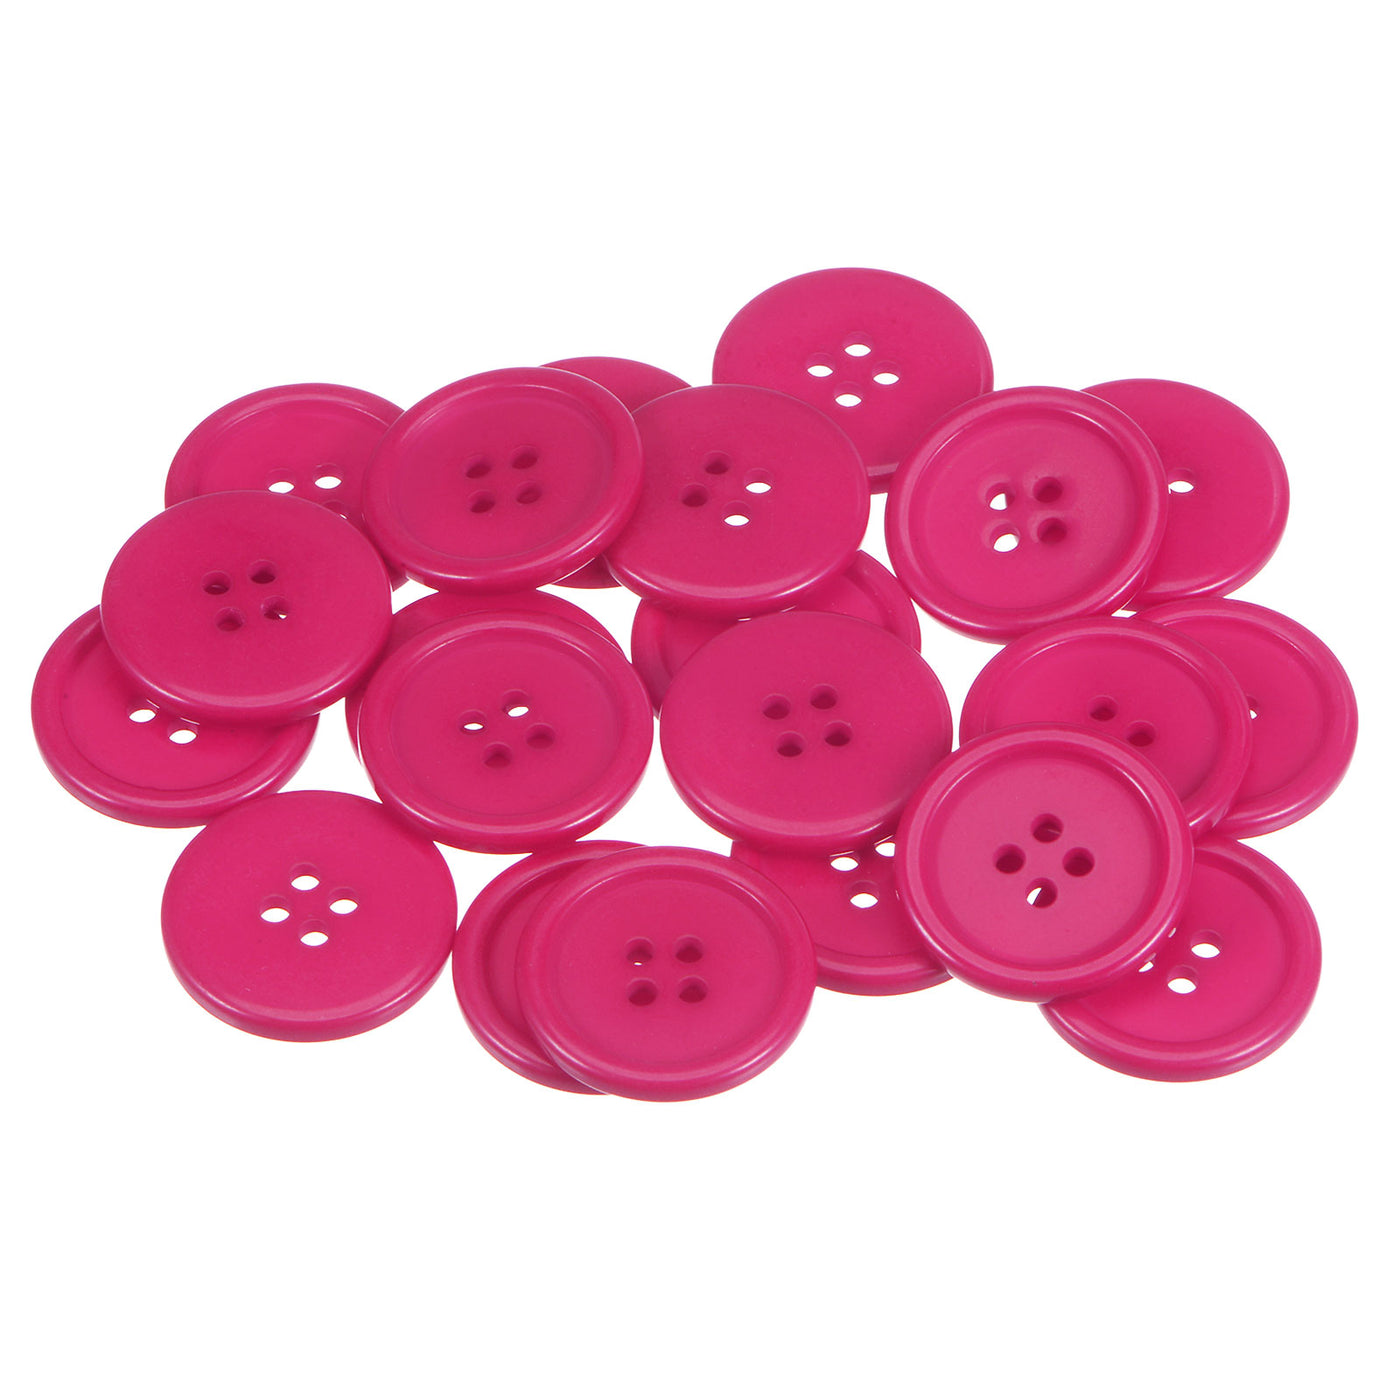 Harfington 60pcs 40L Sewing Buttons 1" Resin Round Flat 4-Hole Craft Buttons, Dark Pink